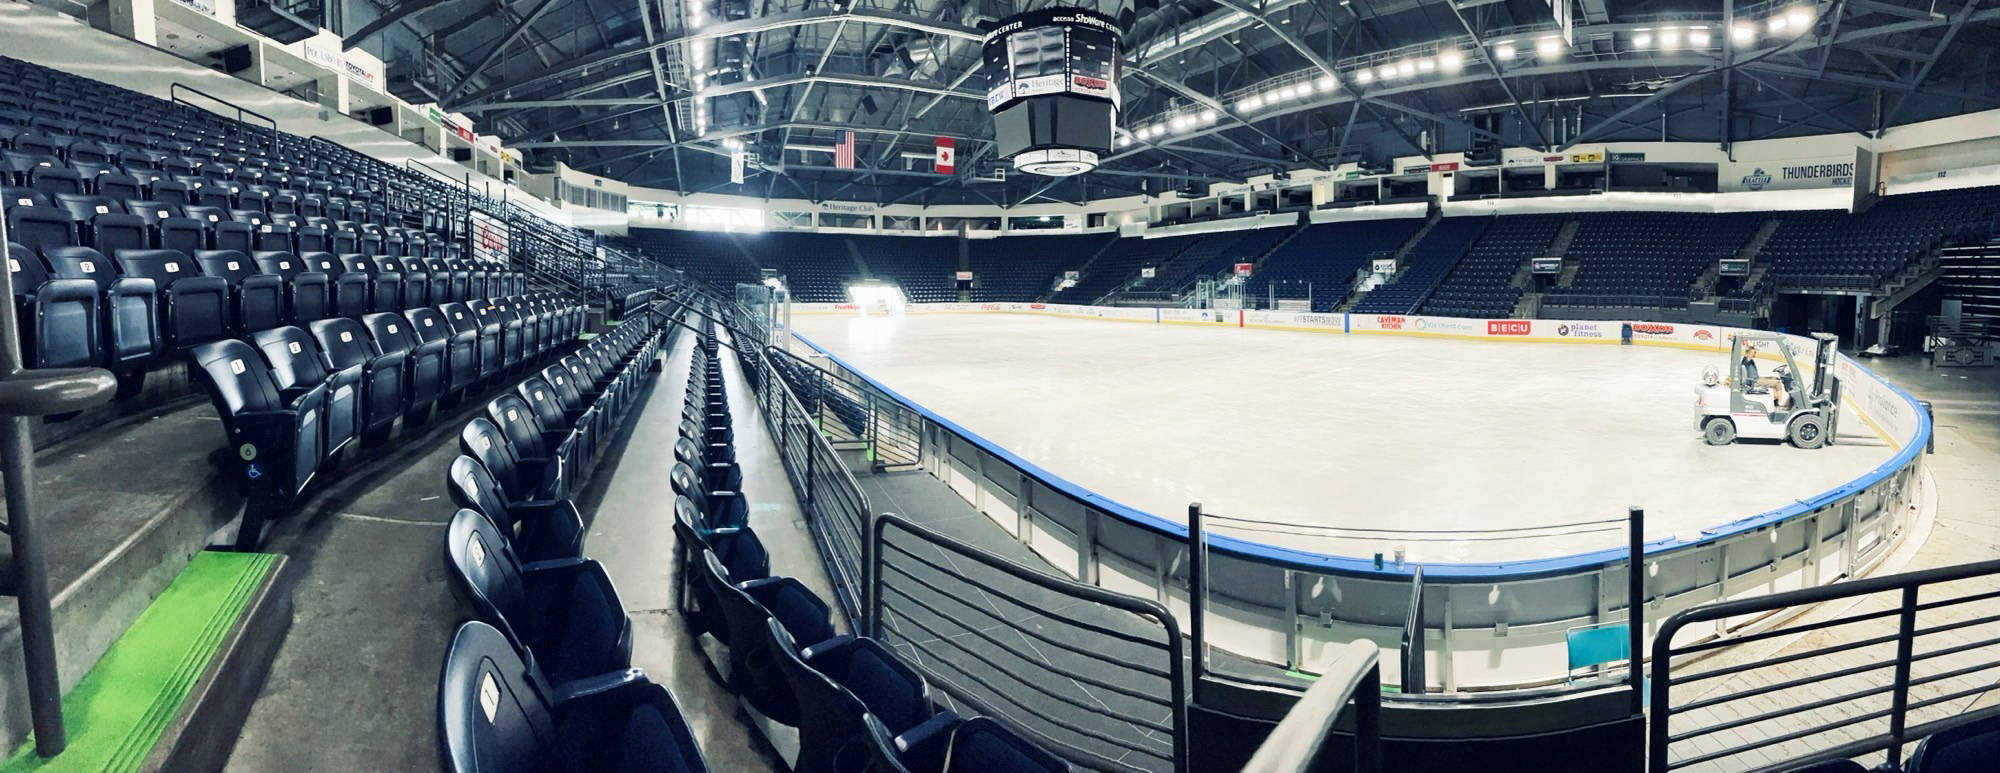 A $3.1 million grant awarded by the U.S. Small Business Administration to the city-owned accesso ShoWare Center in Kent will help cover losses and expenses during the pandemic. COURTESY PHOTO, Seattle Thunderbirds